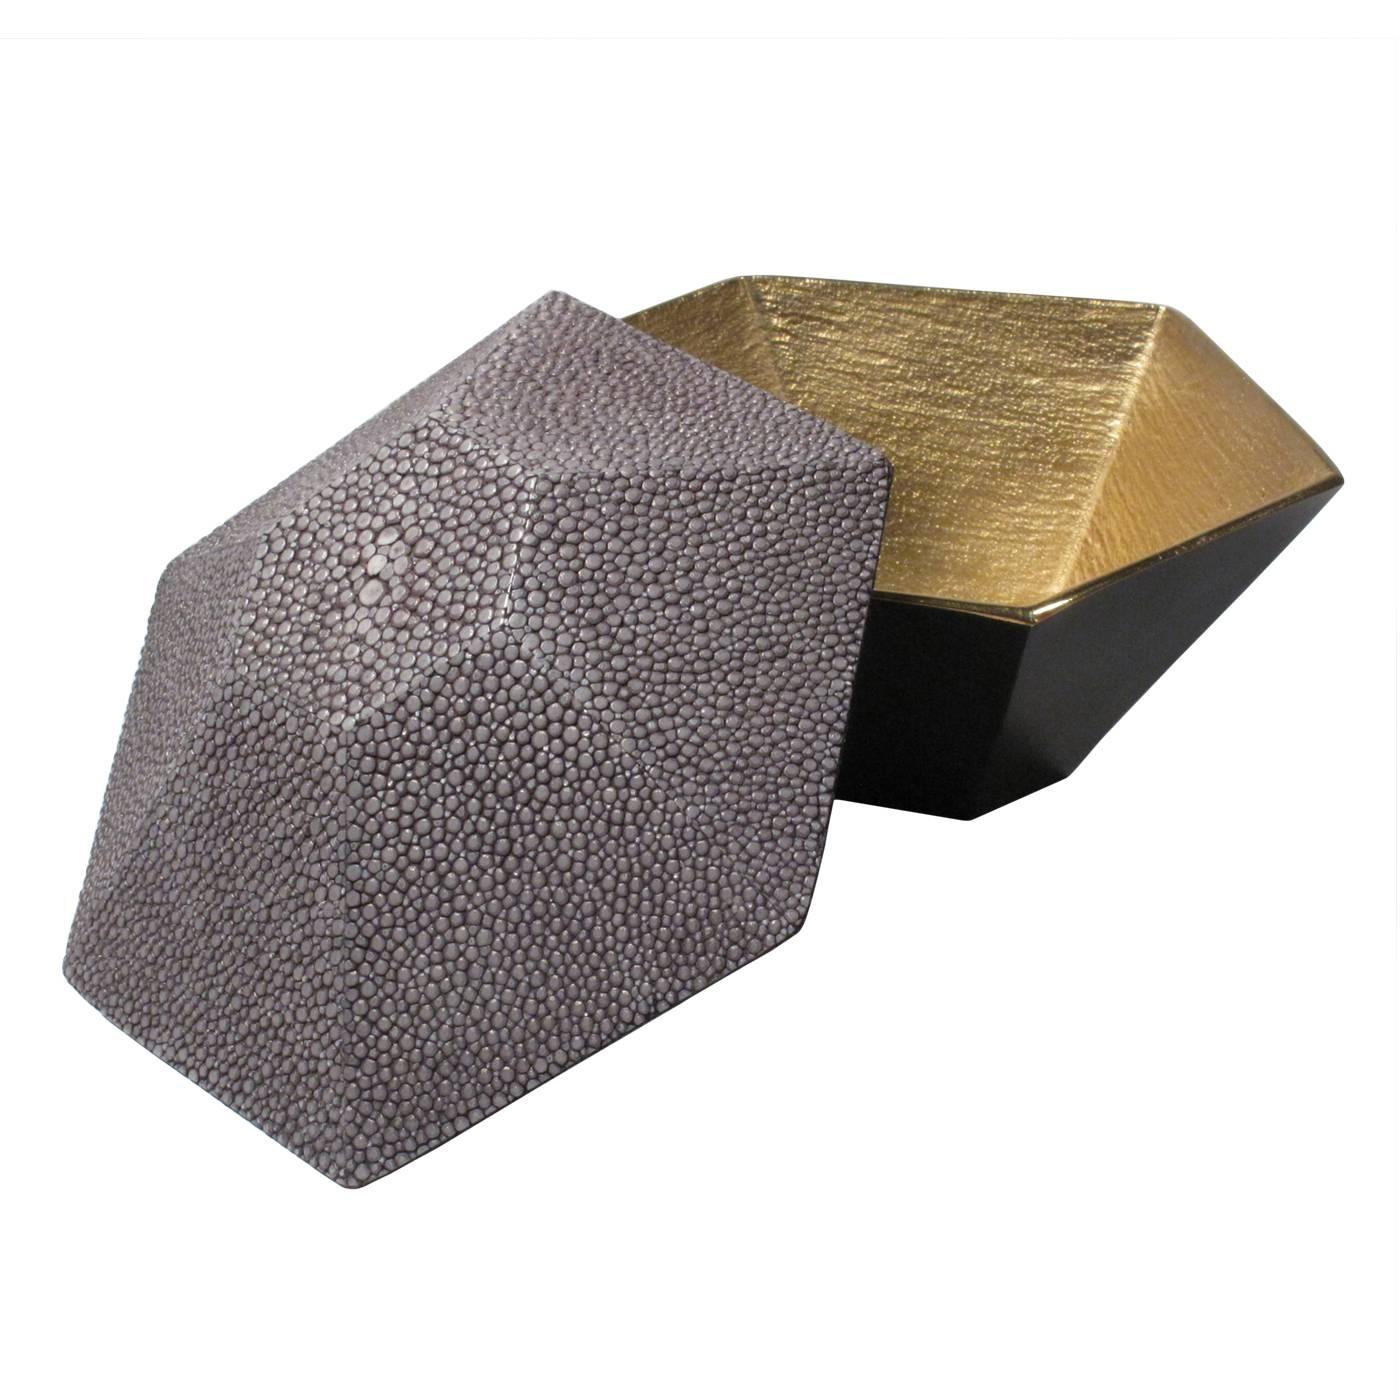 A geometrically shaped grey shagreen box with a blackened brass base. Brushed brass interior.